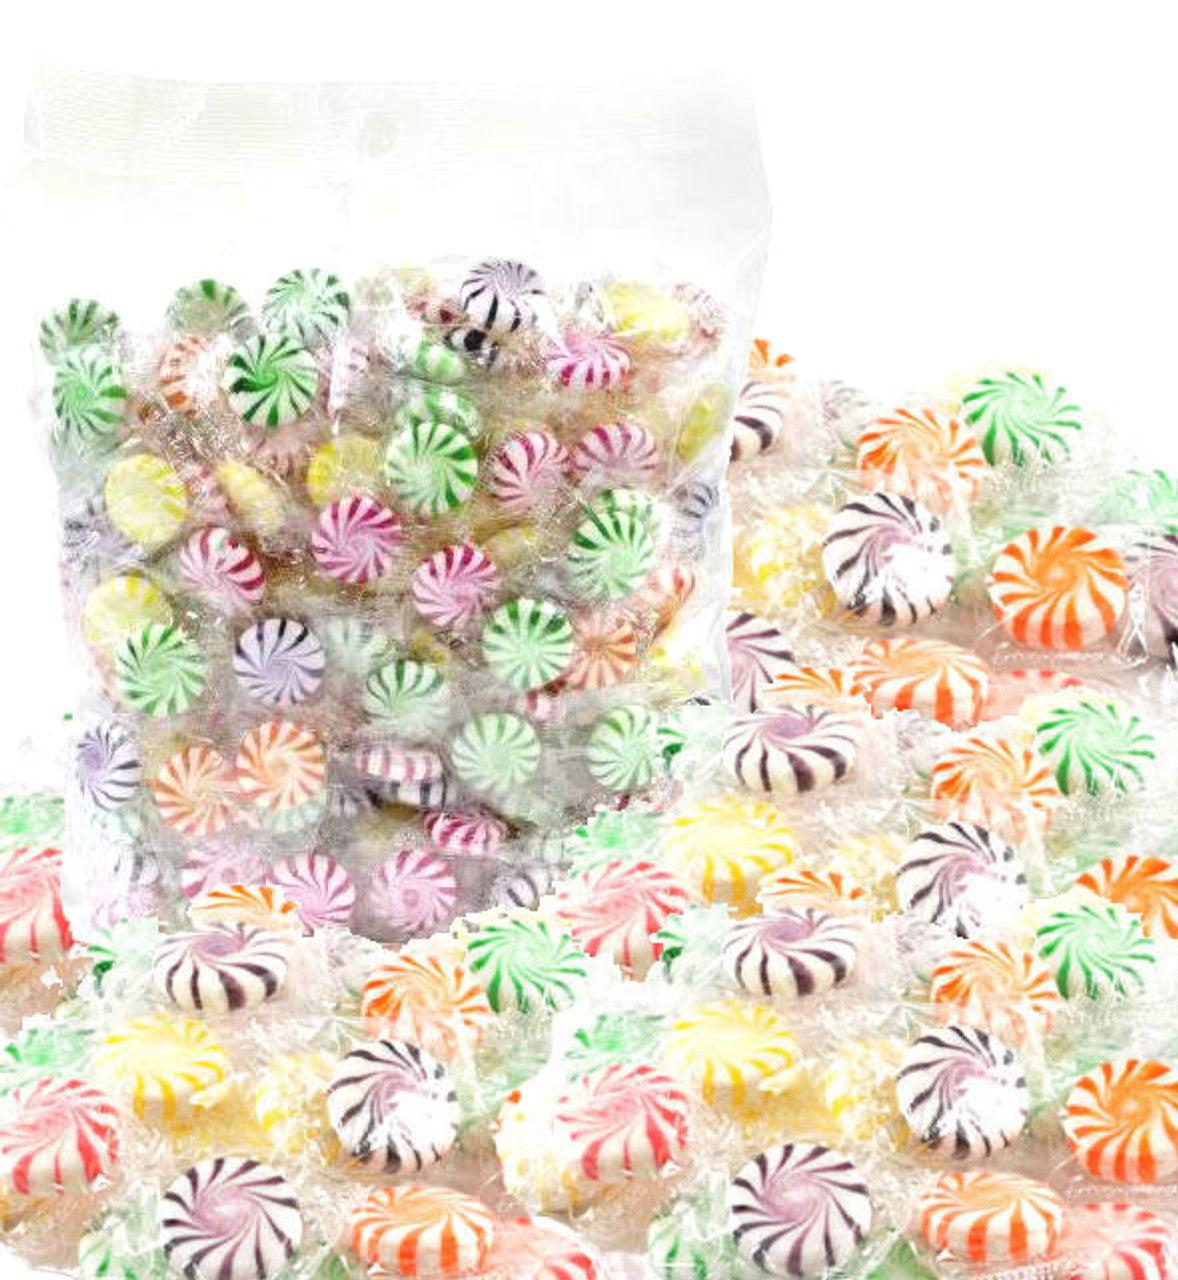 Bag of 40 Assorted Flavors Starlight Mints